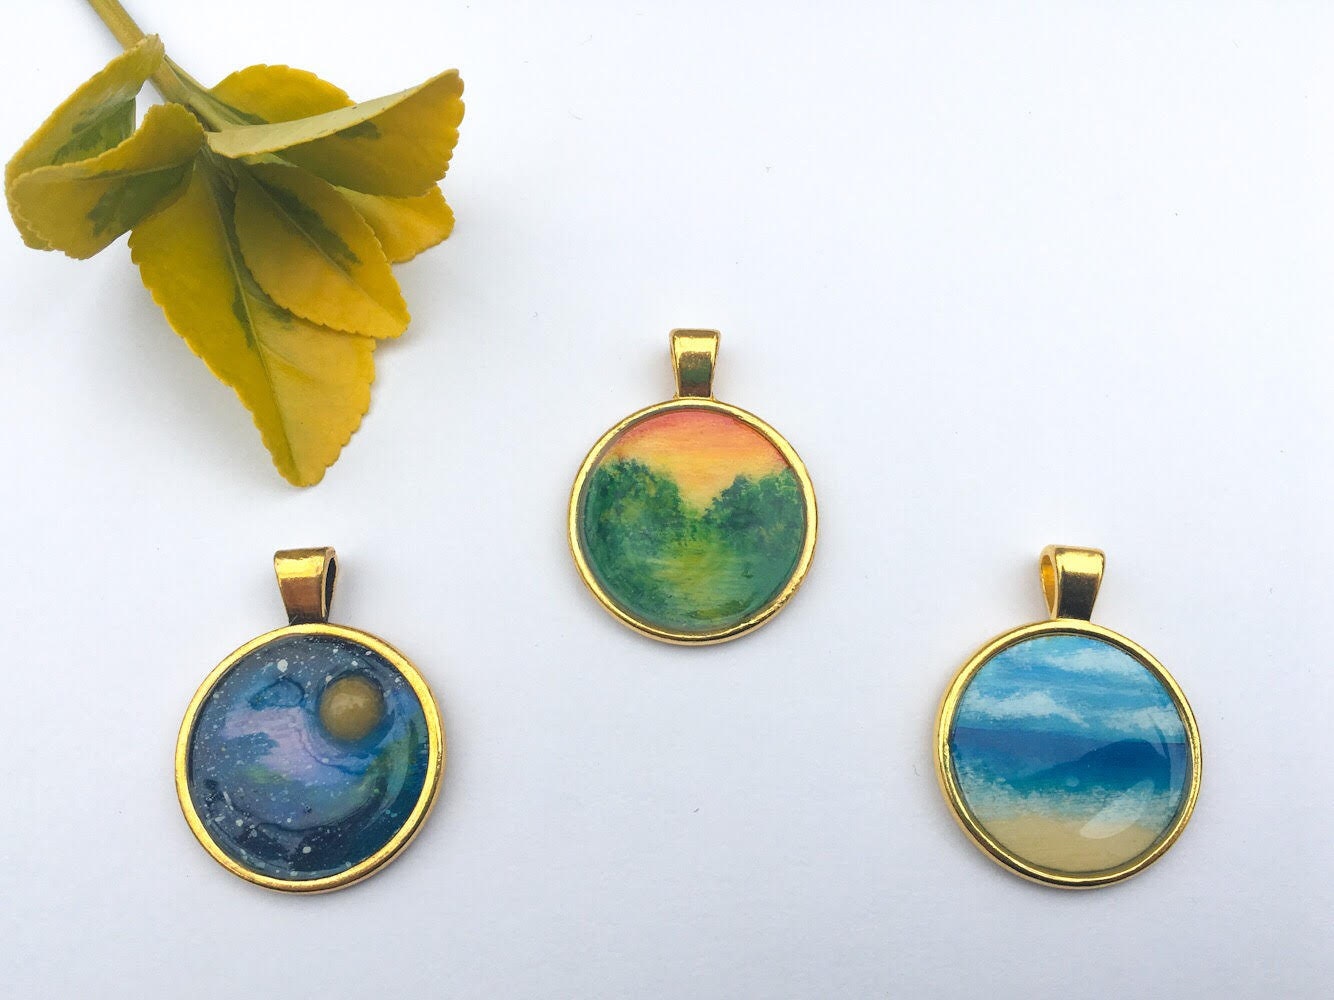 One of a Kind Hand Painted Glass Cabochon Pendants The Nebula Collection